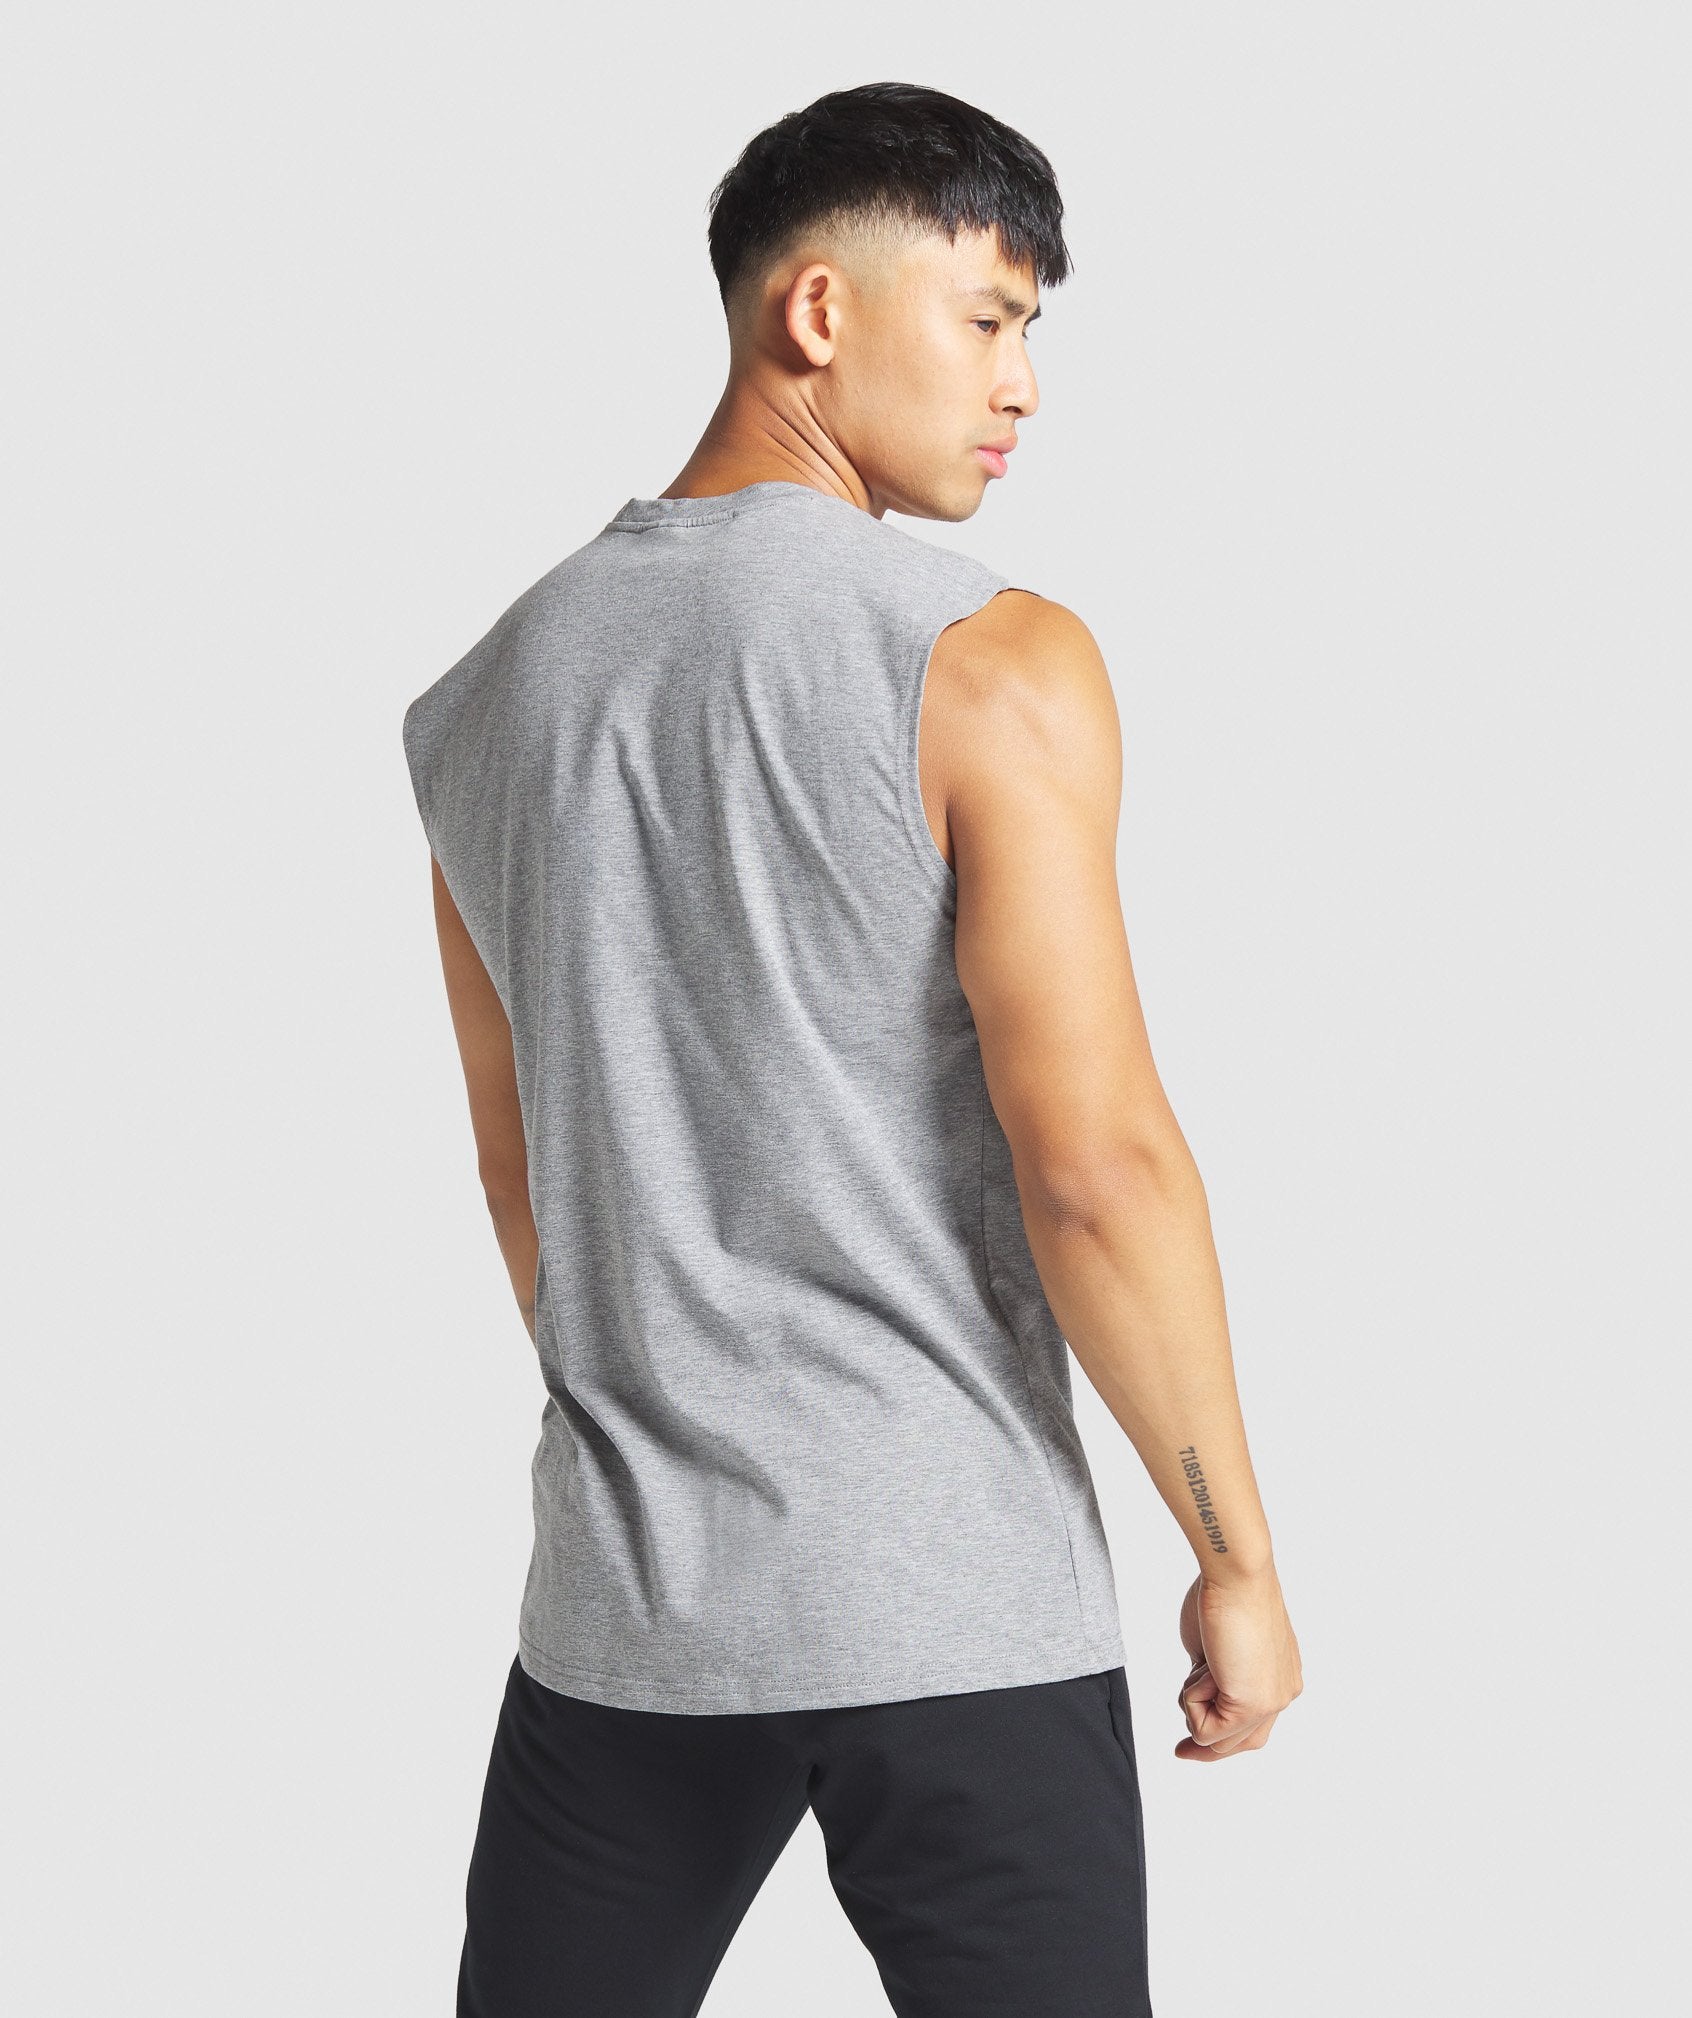 Critical Sleeveless Tee in Charcoal Marl - view 2